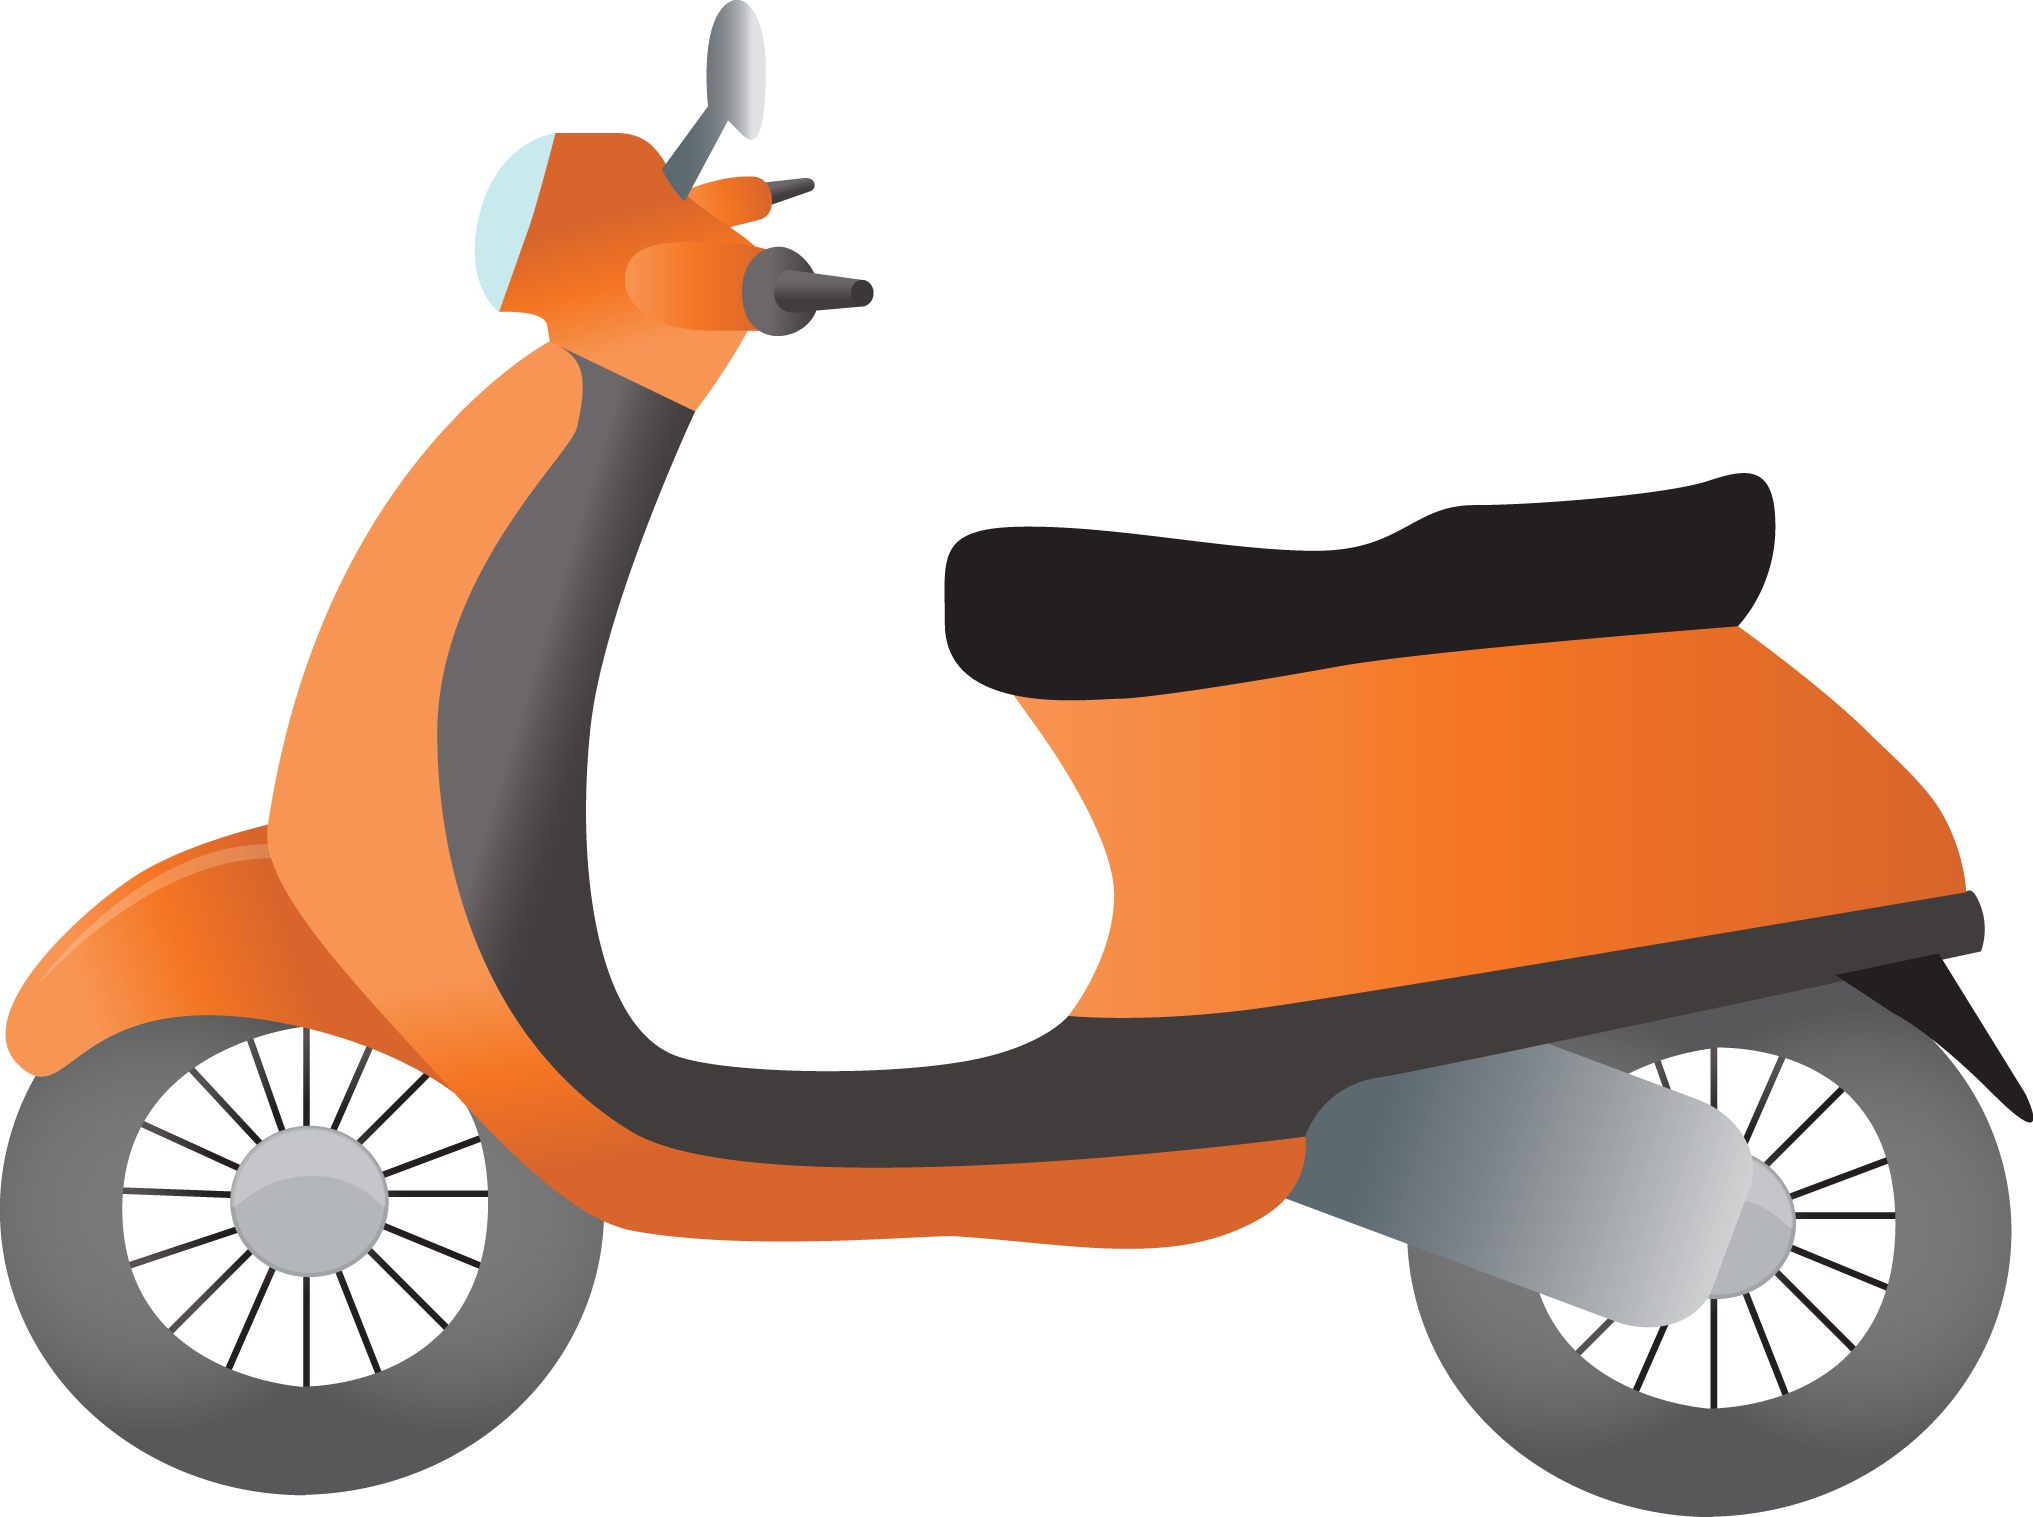 Scooter clipart transparent. Png image purepng free